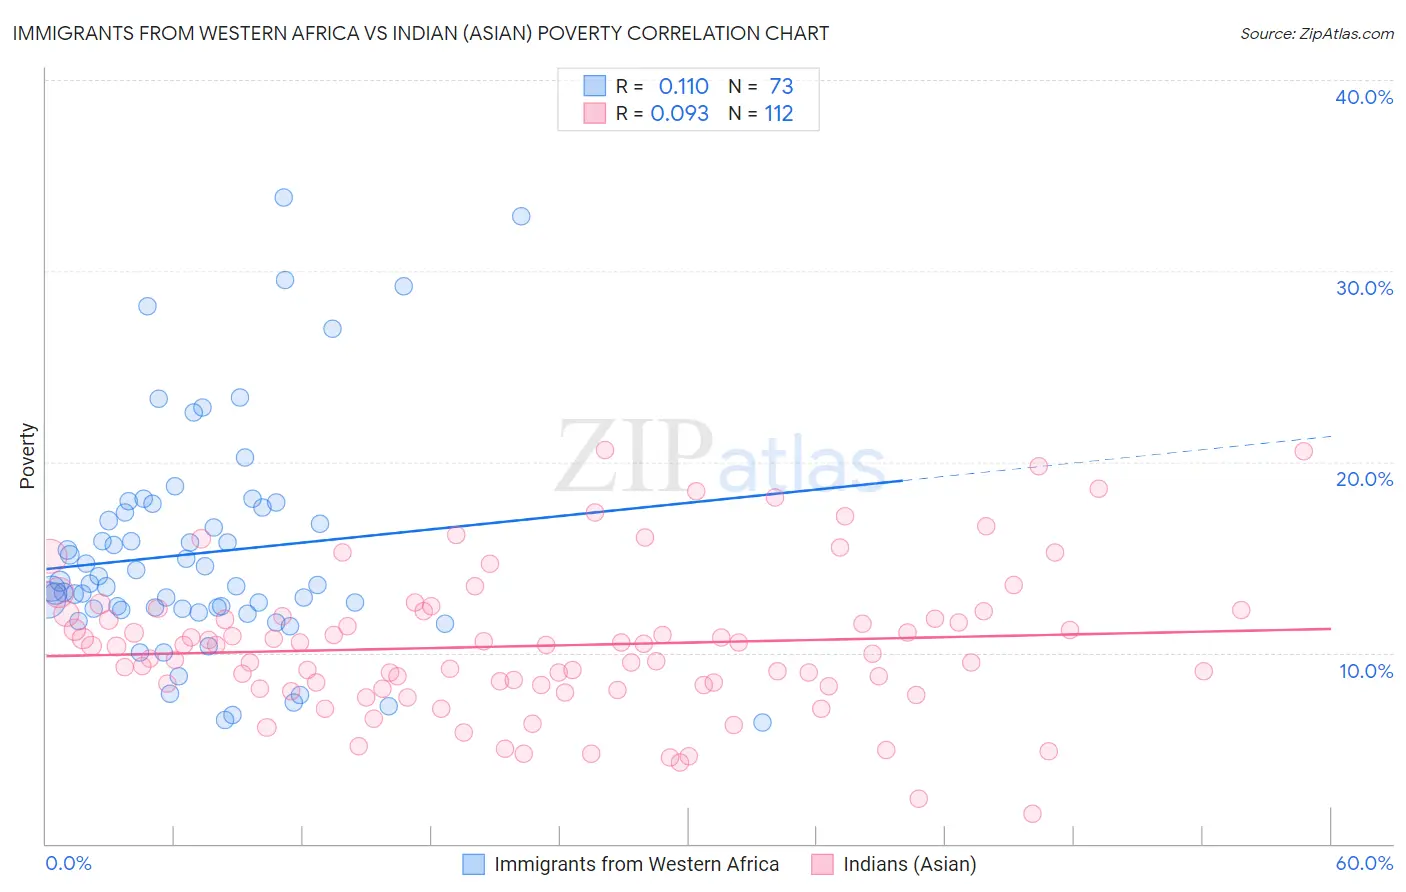 Immigrants from Western Africa vs Indian (Asian) Poverty